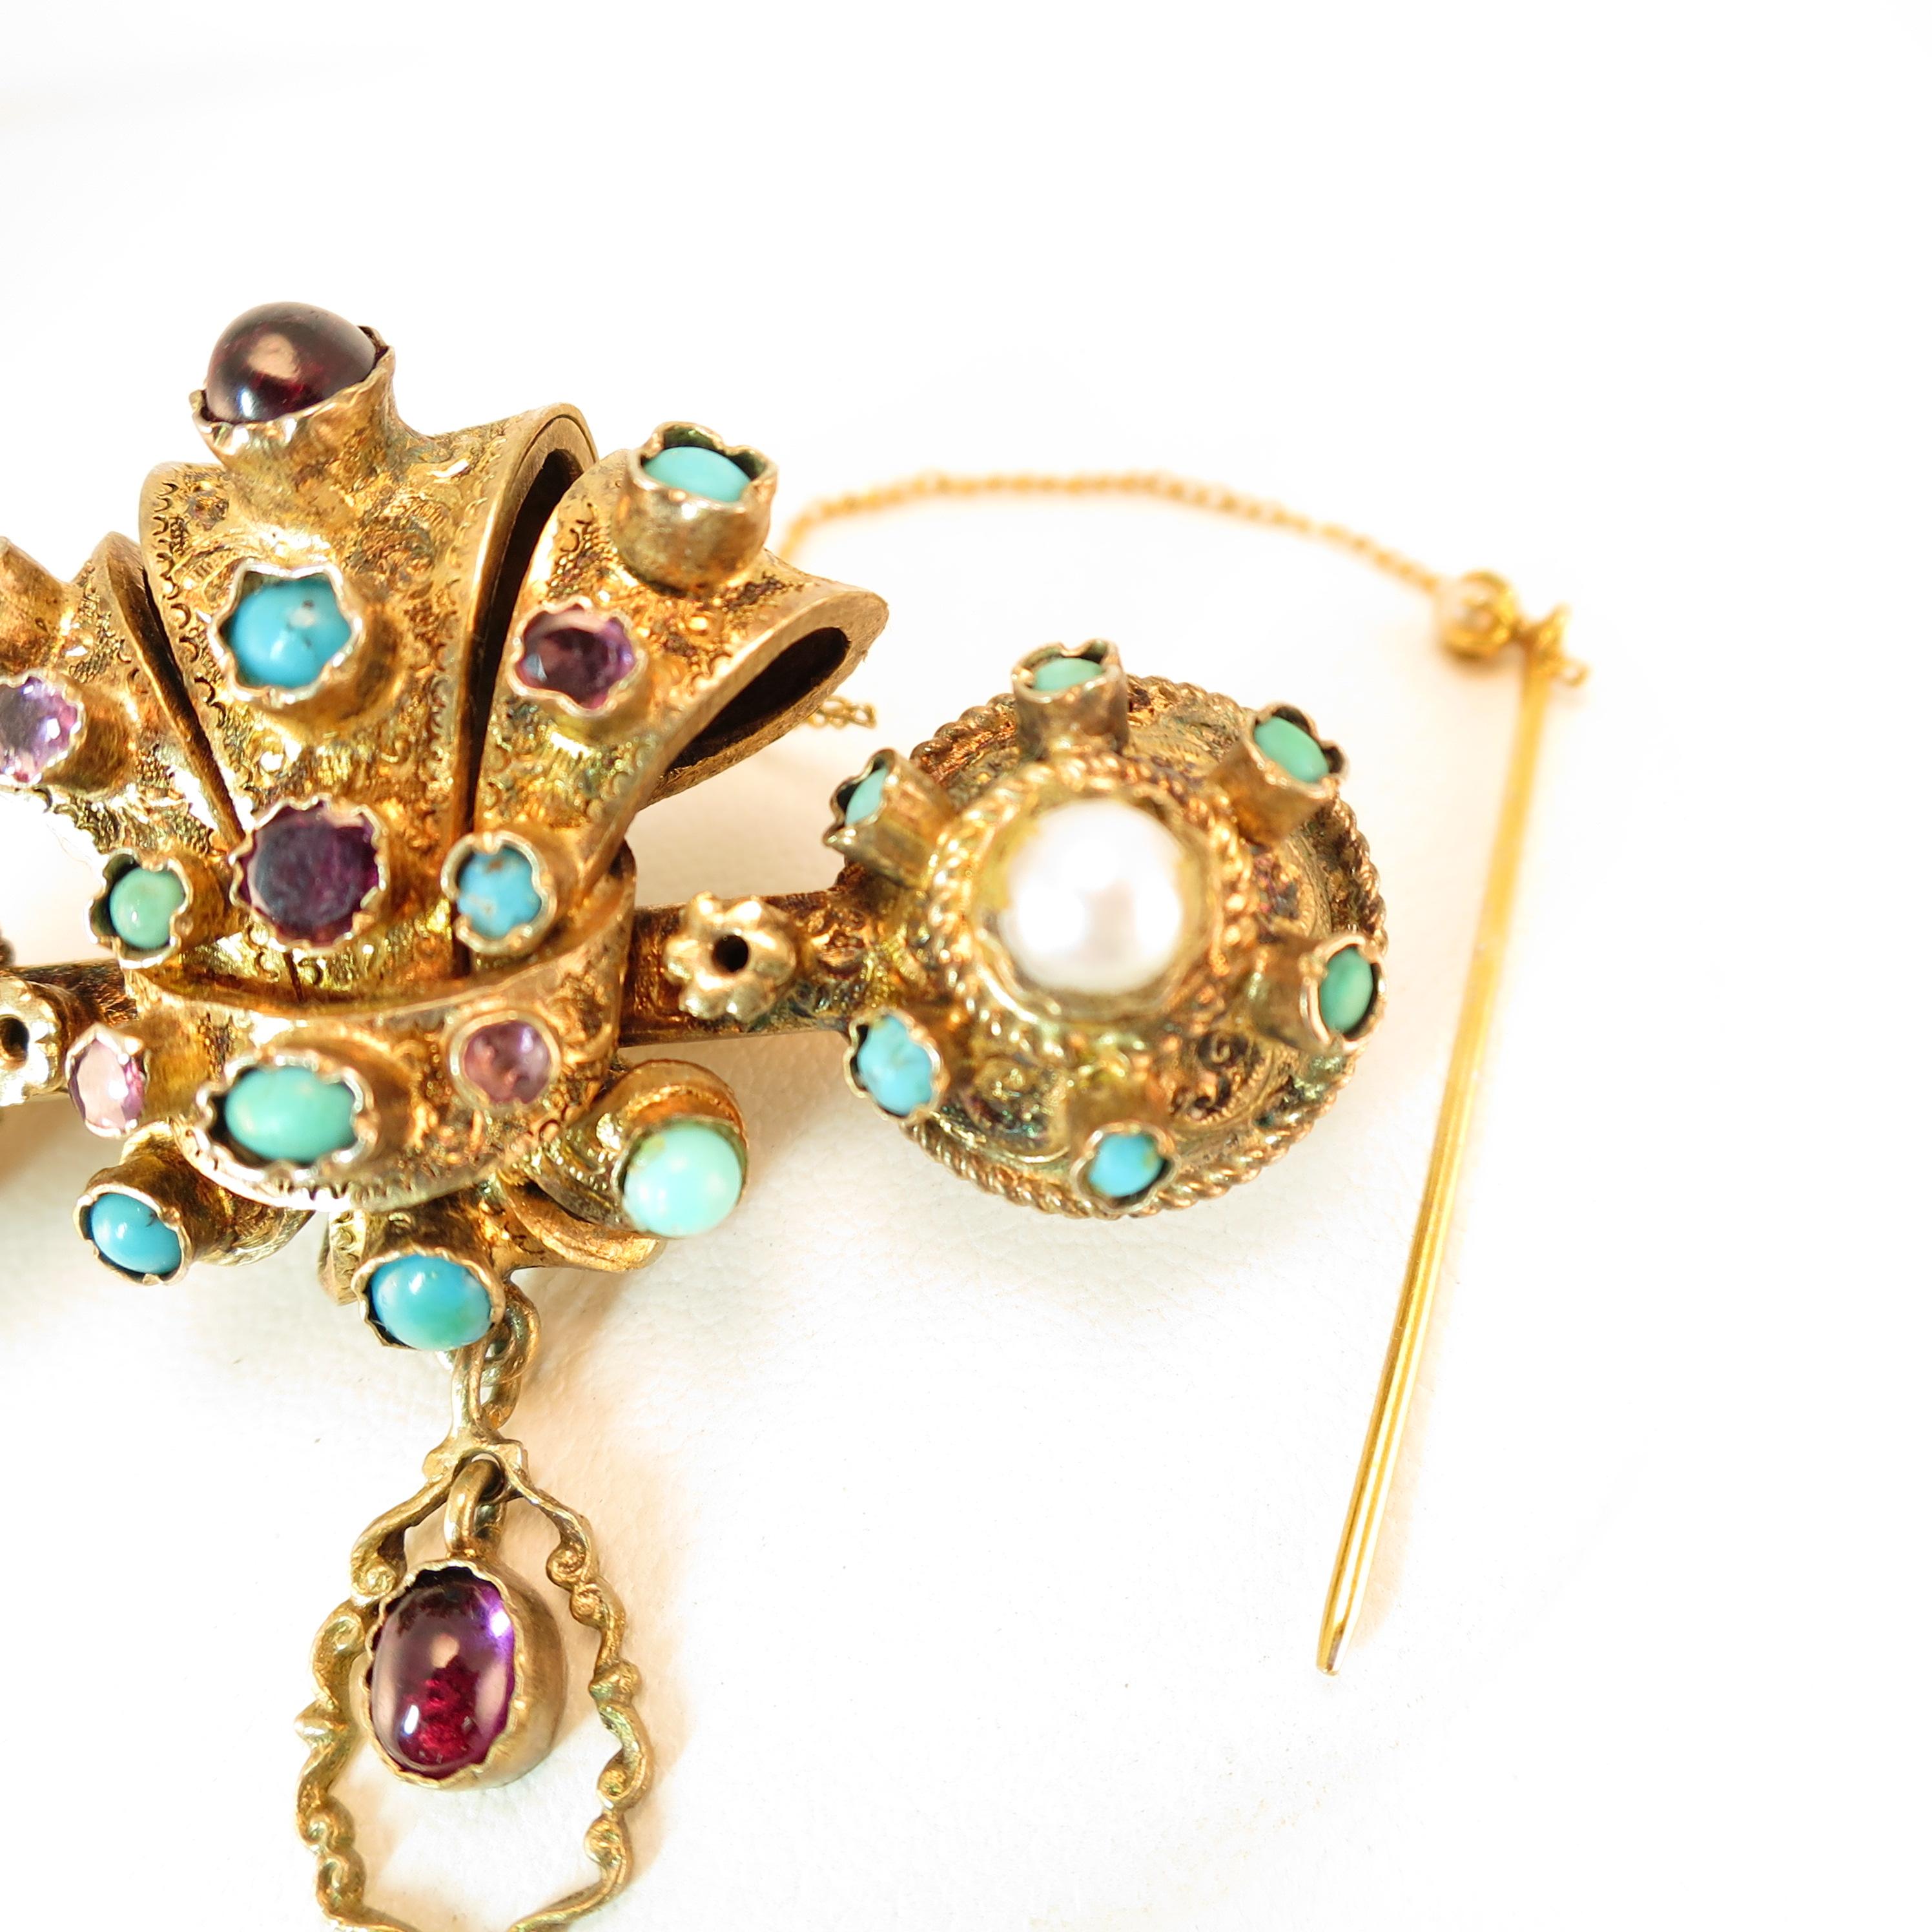 Women's Georgian Baroque Brooch 10k Gold Amethyst Turquoise Pearls Circa 1840 For Sale